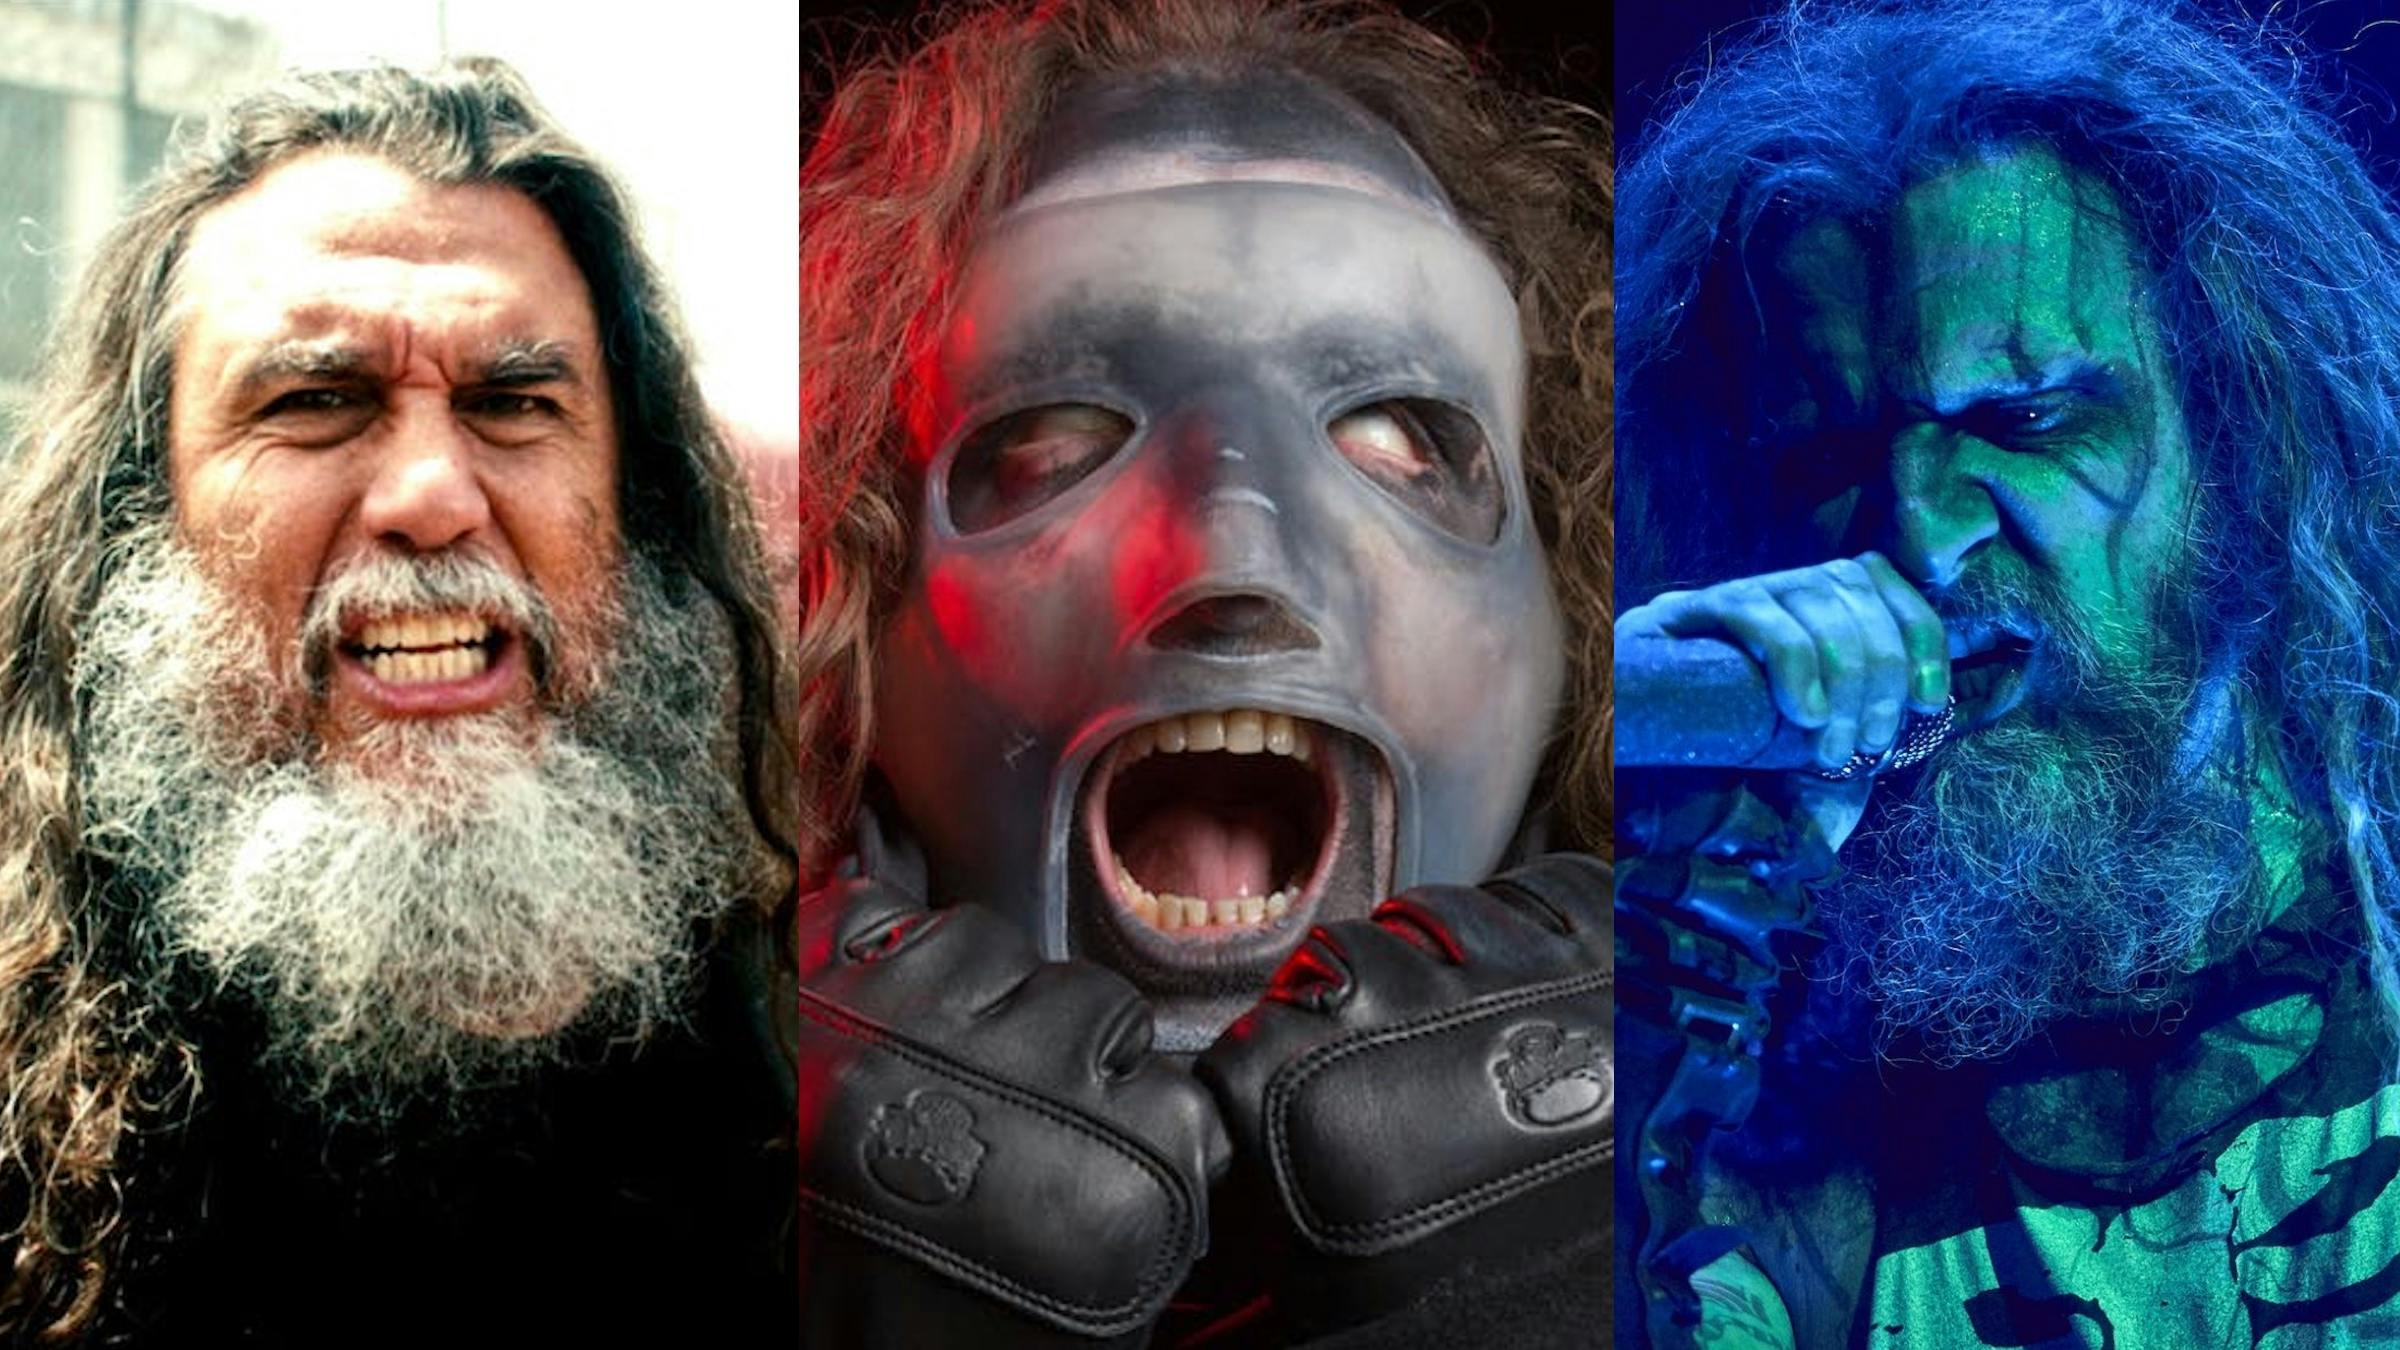 13 of the greatest metal songs from late in a band’s career